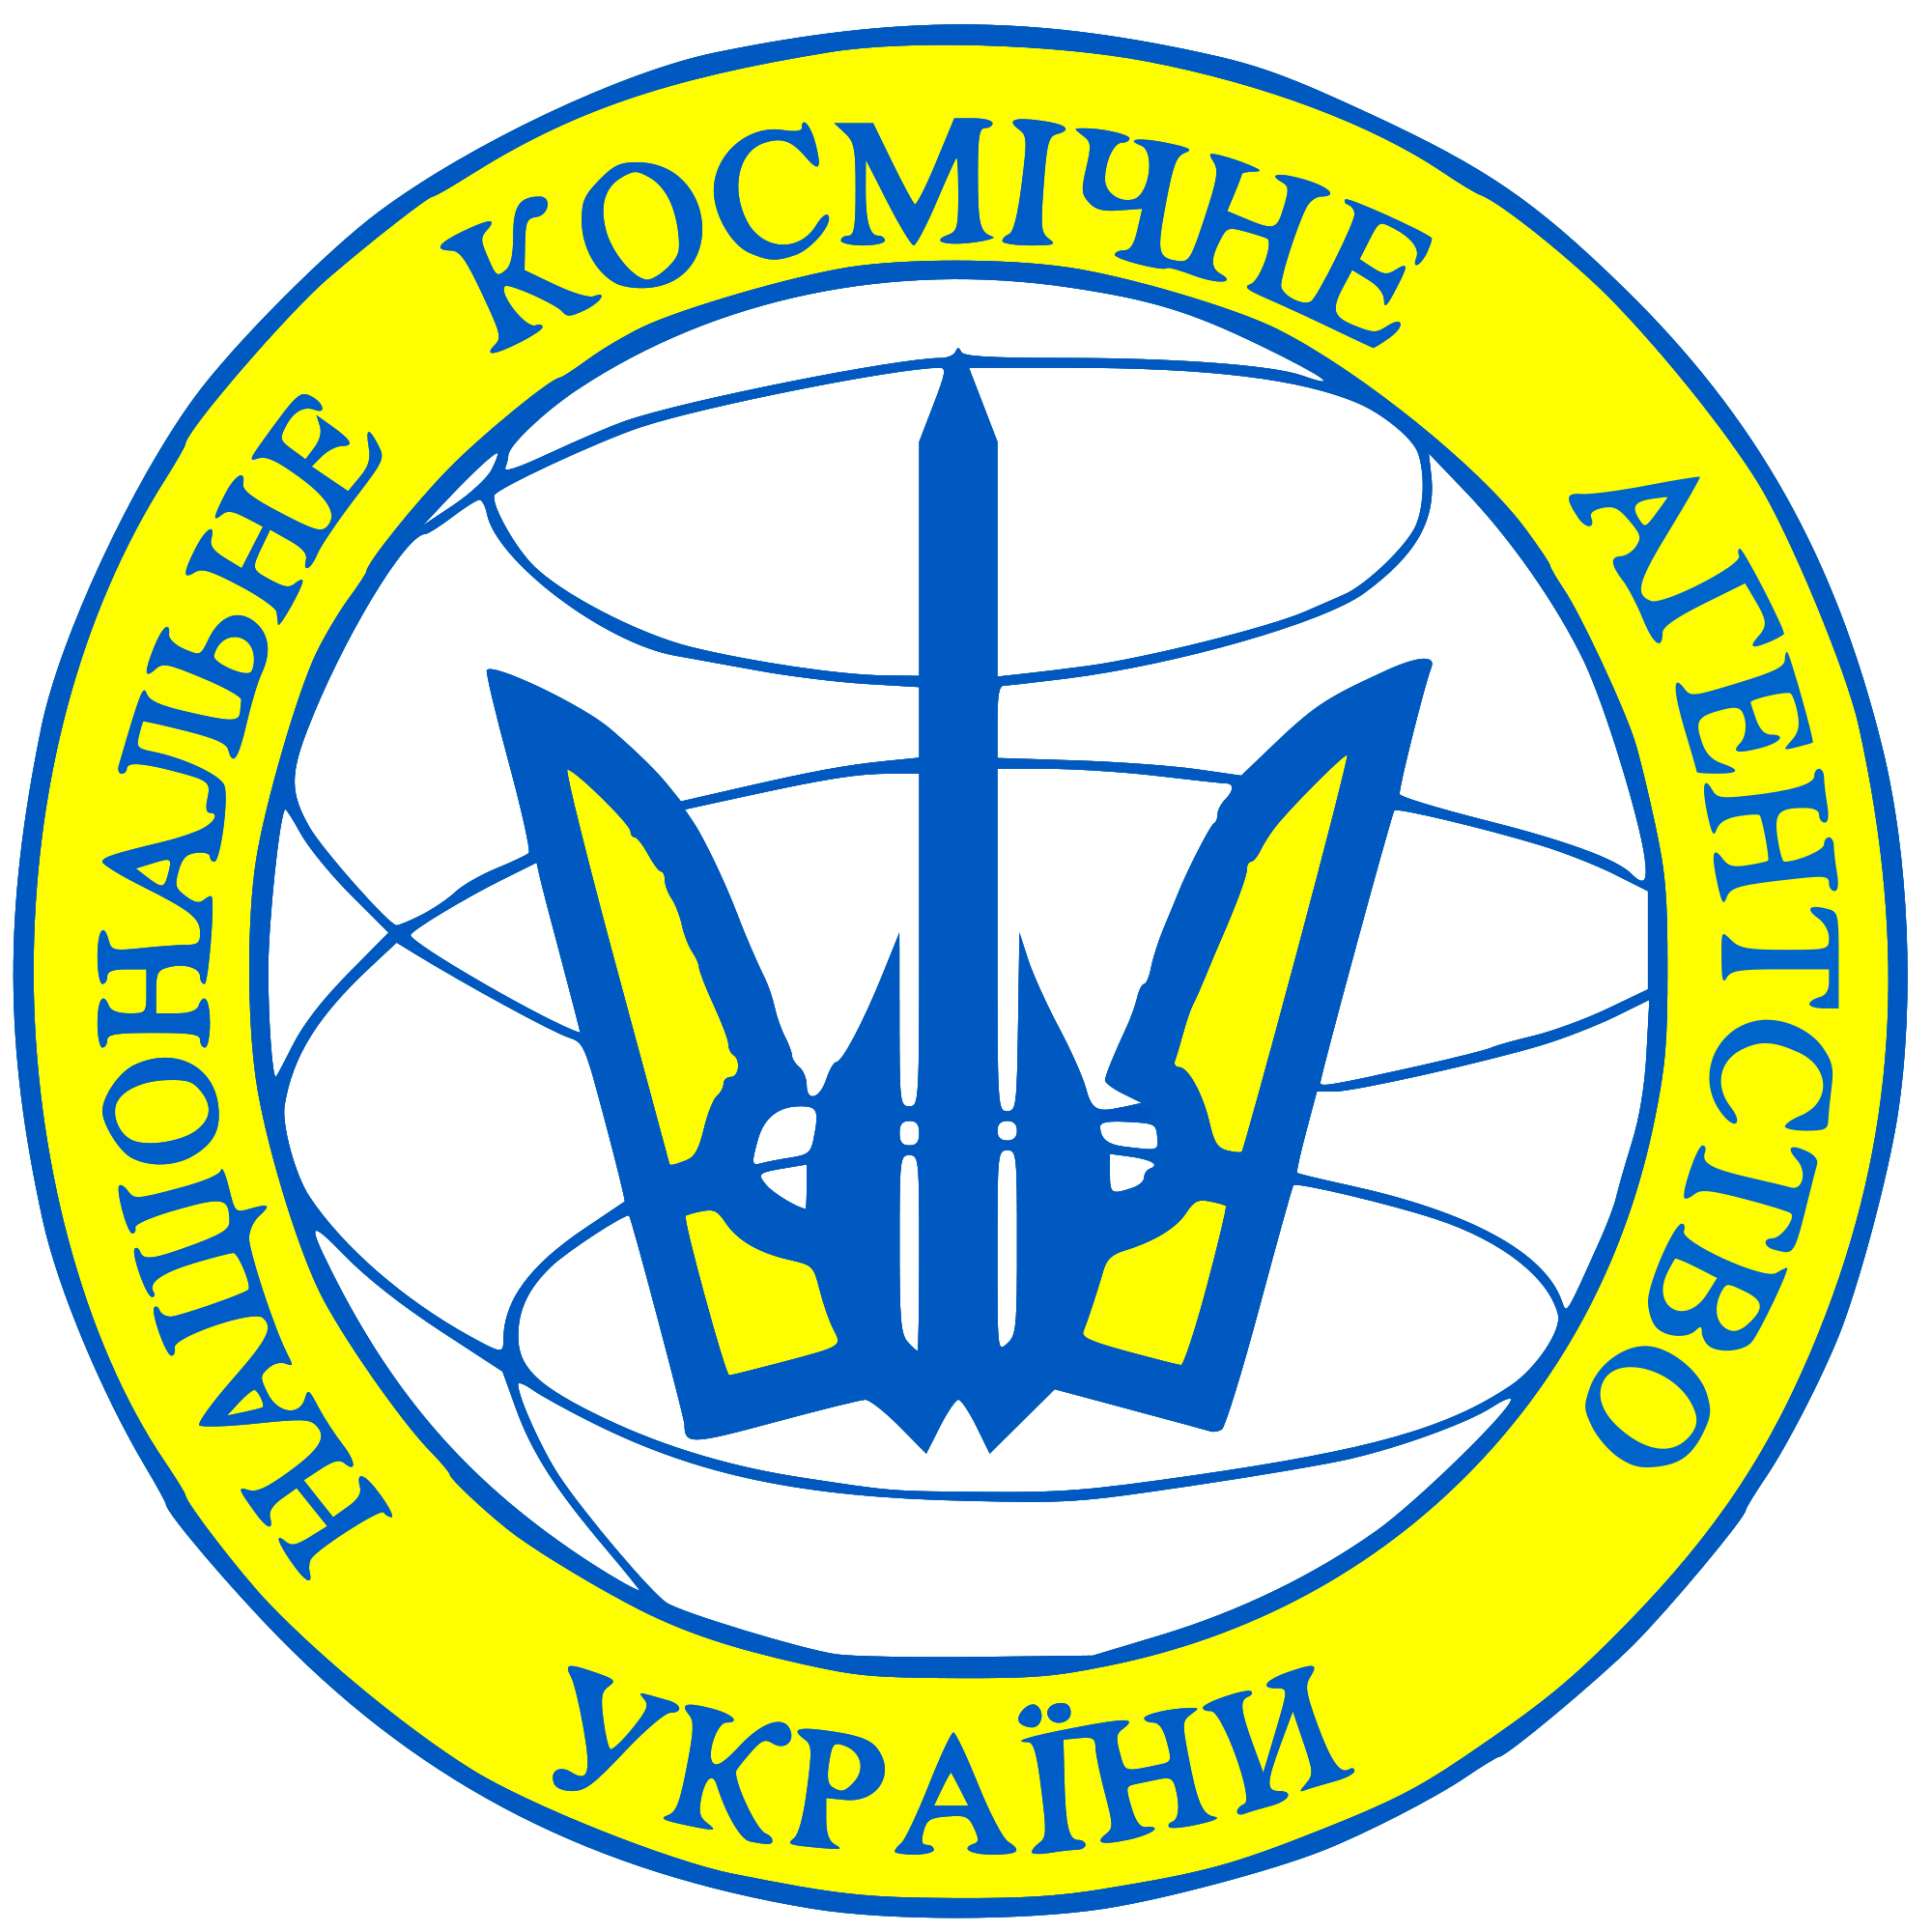 State Space Agency of Ukraine